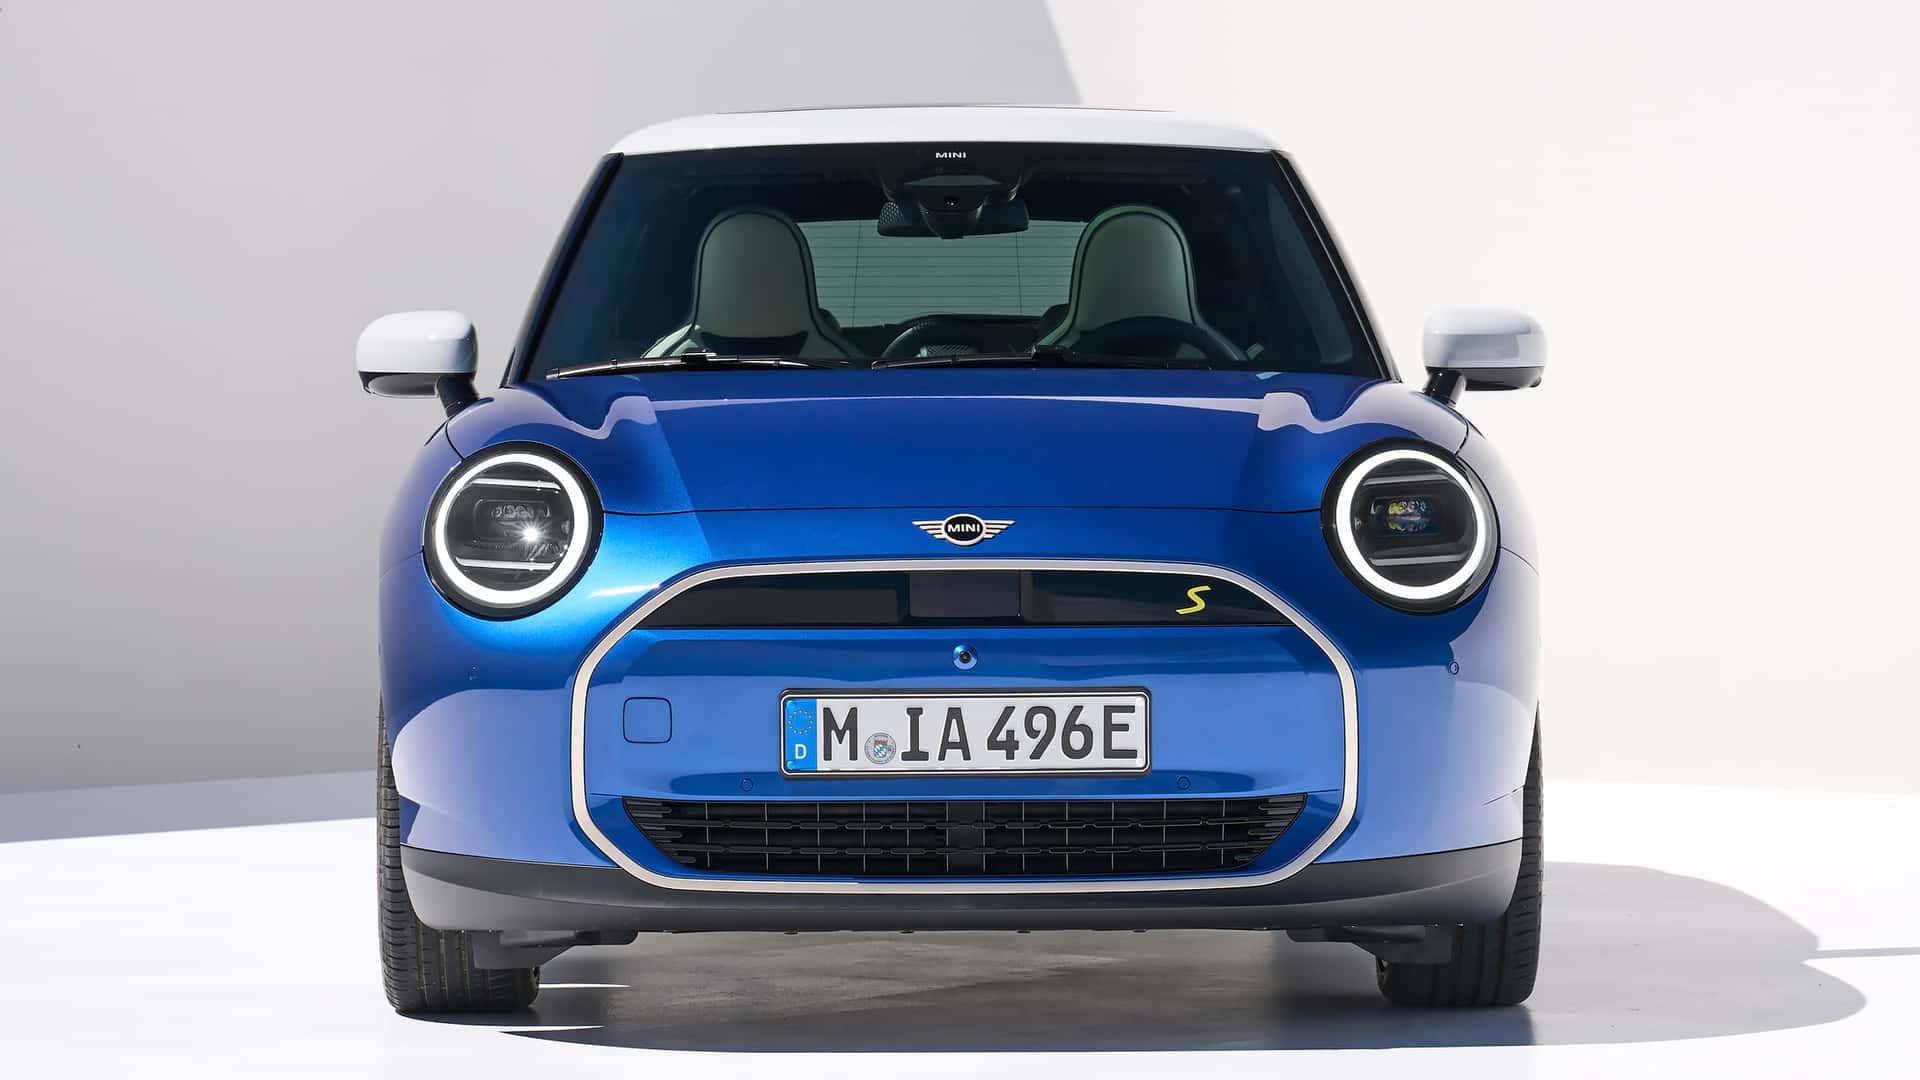 bmw group invests $645 million to produce mini evs in the uk